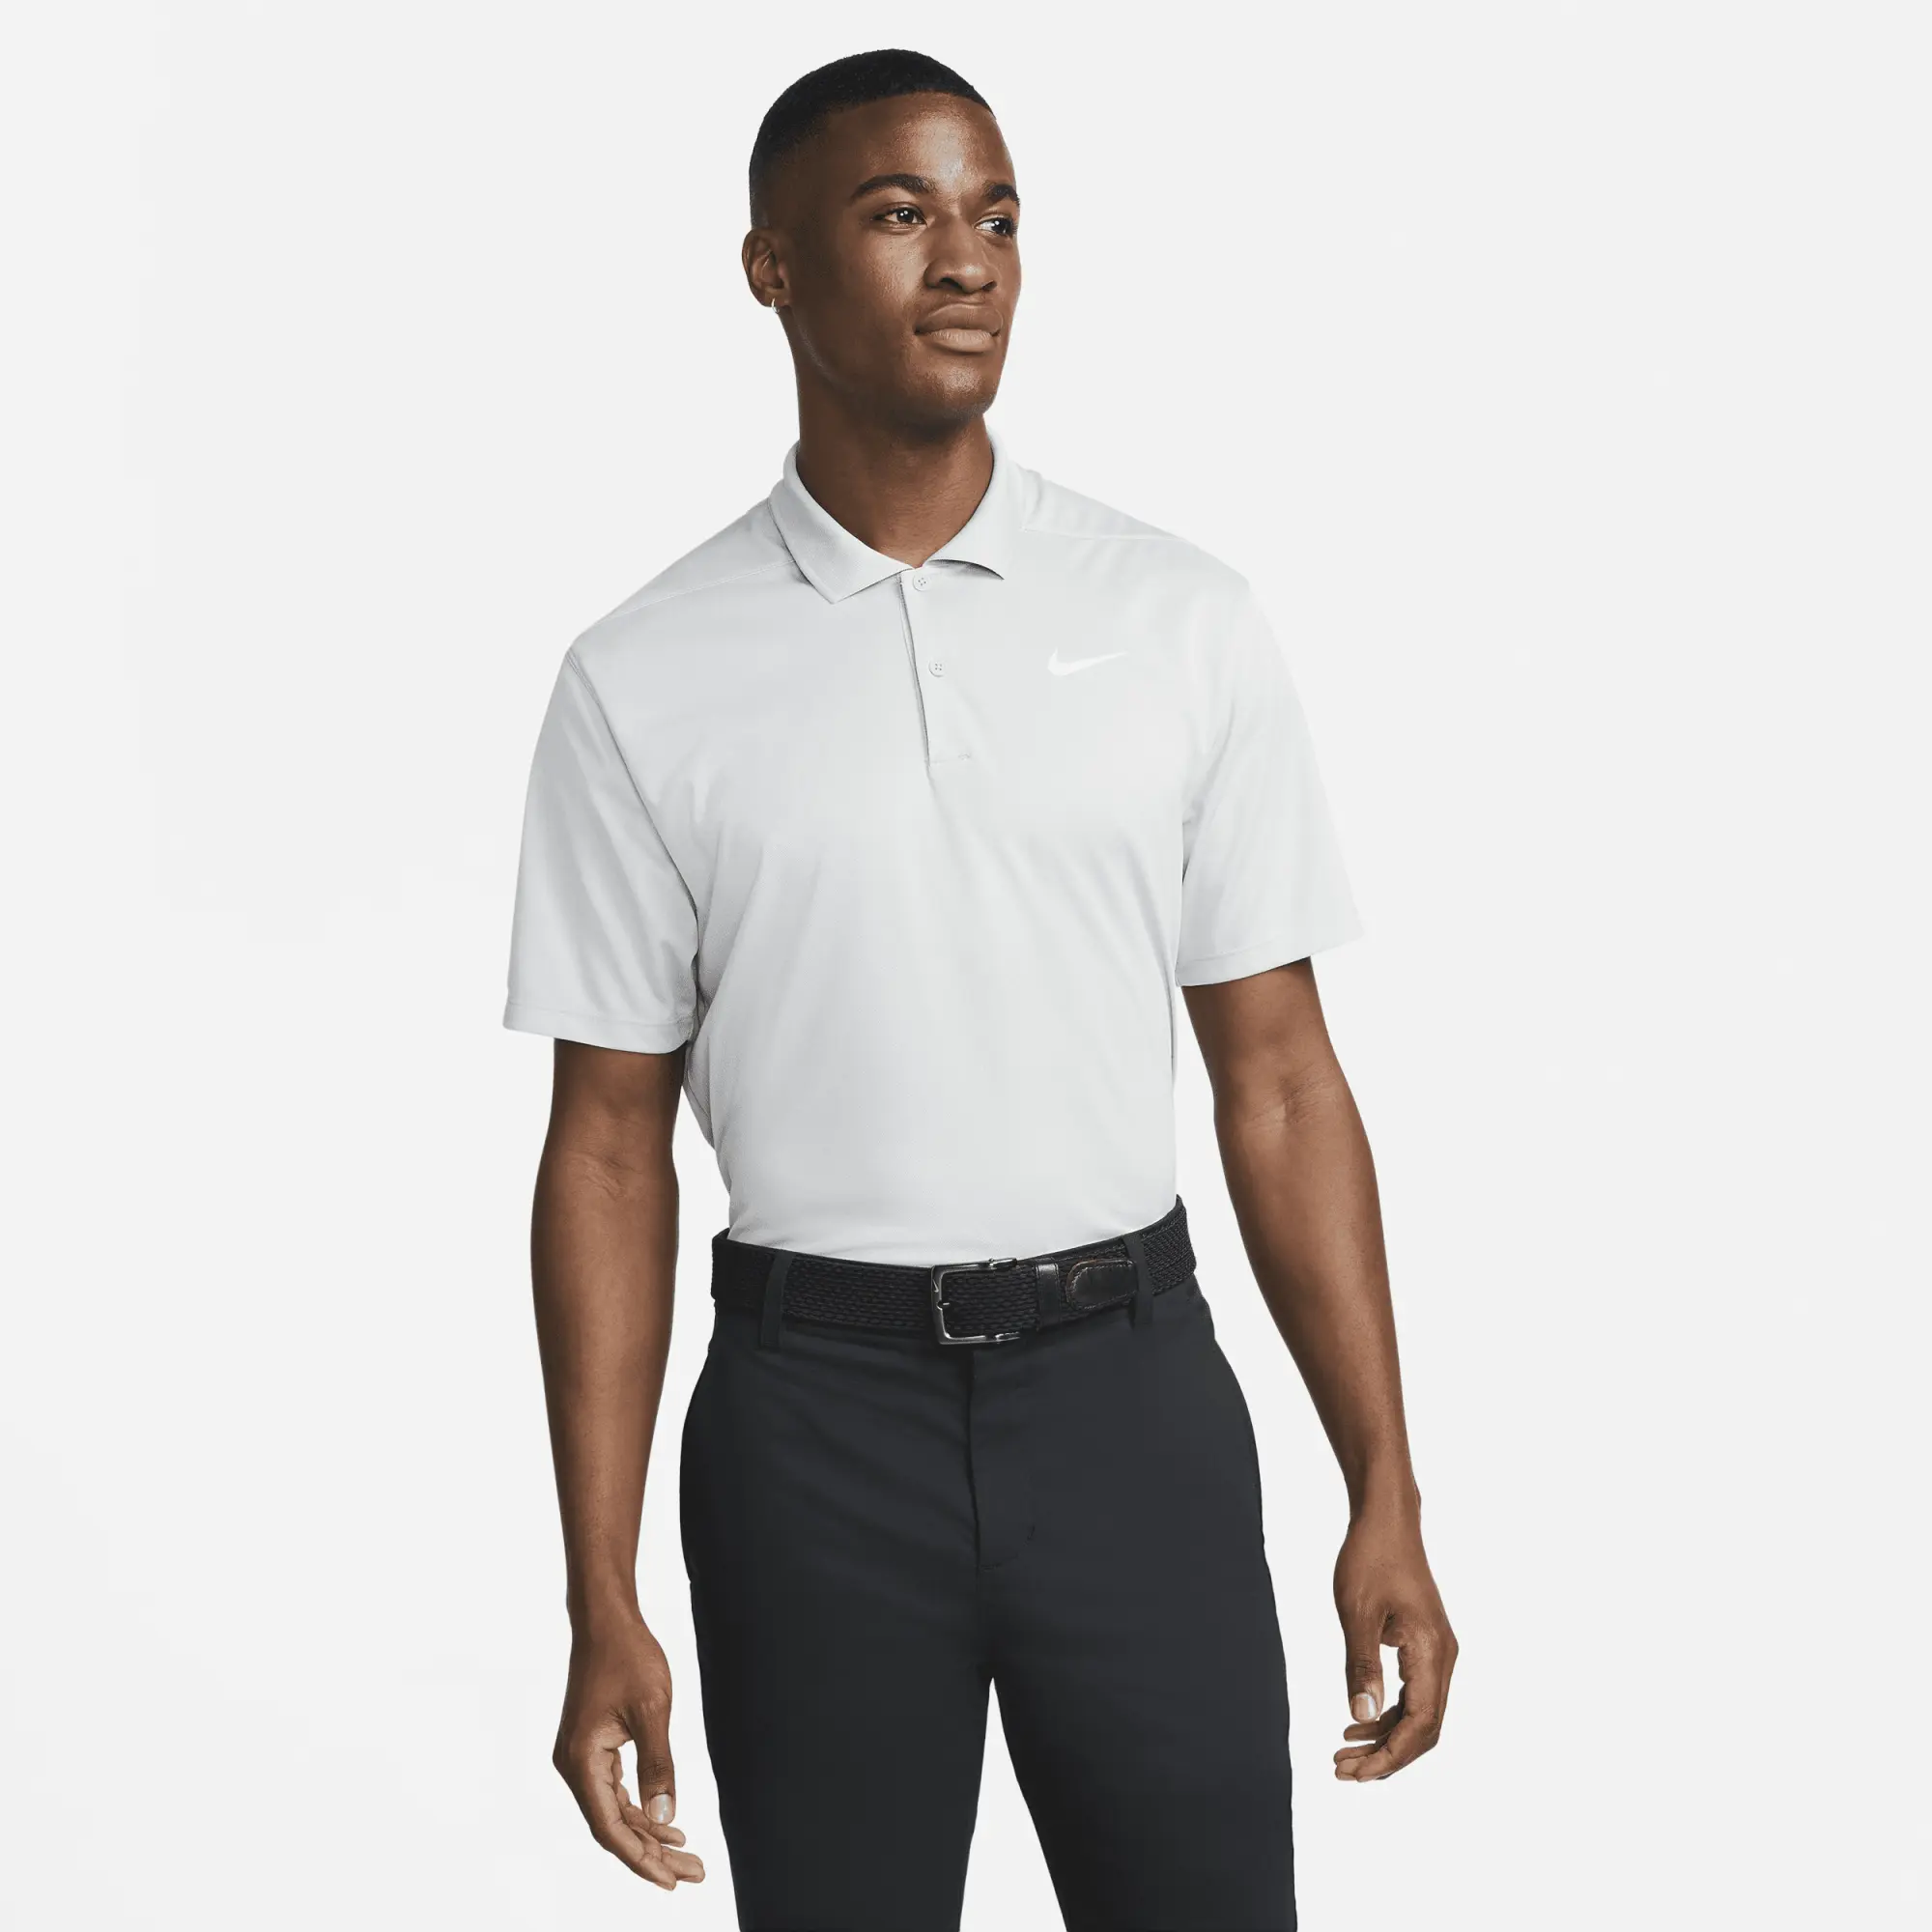 Nike Golf Victory polo in grey